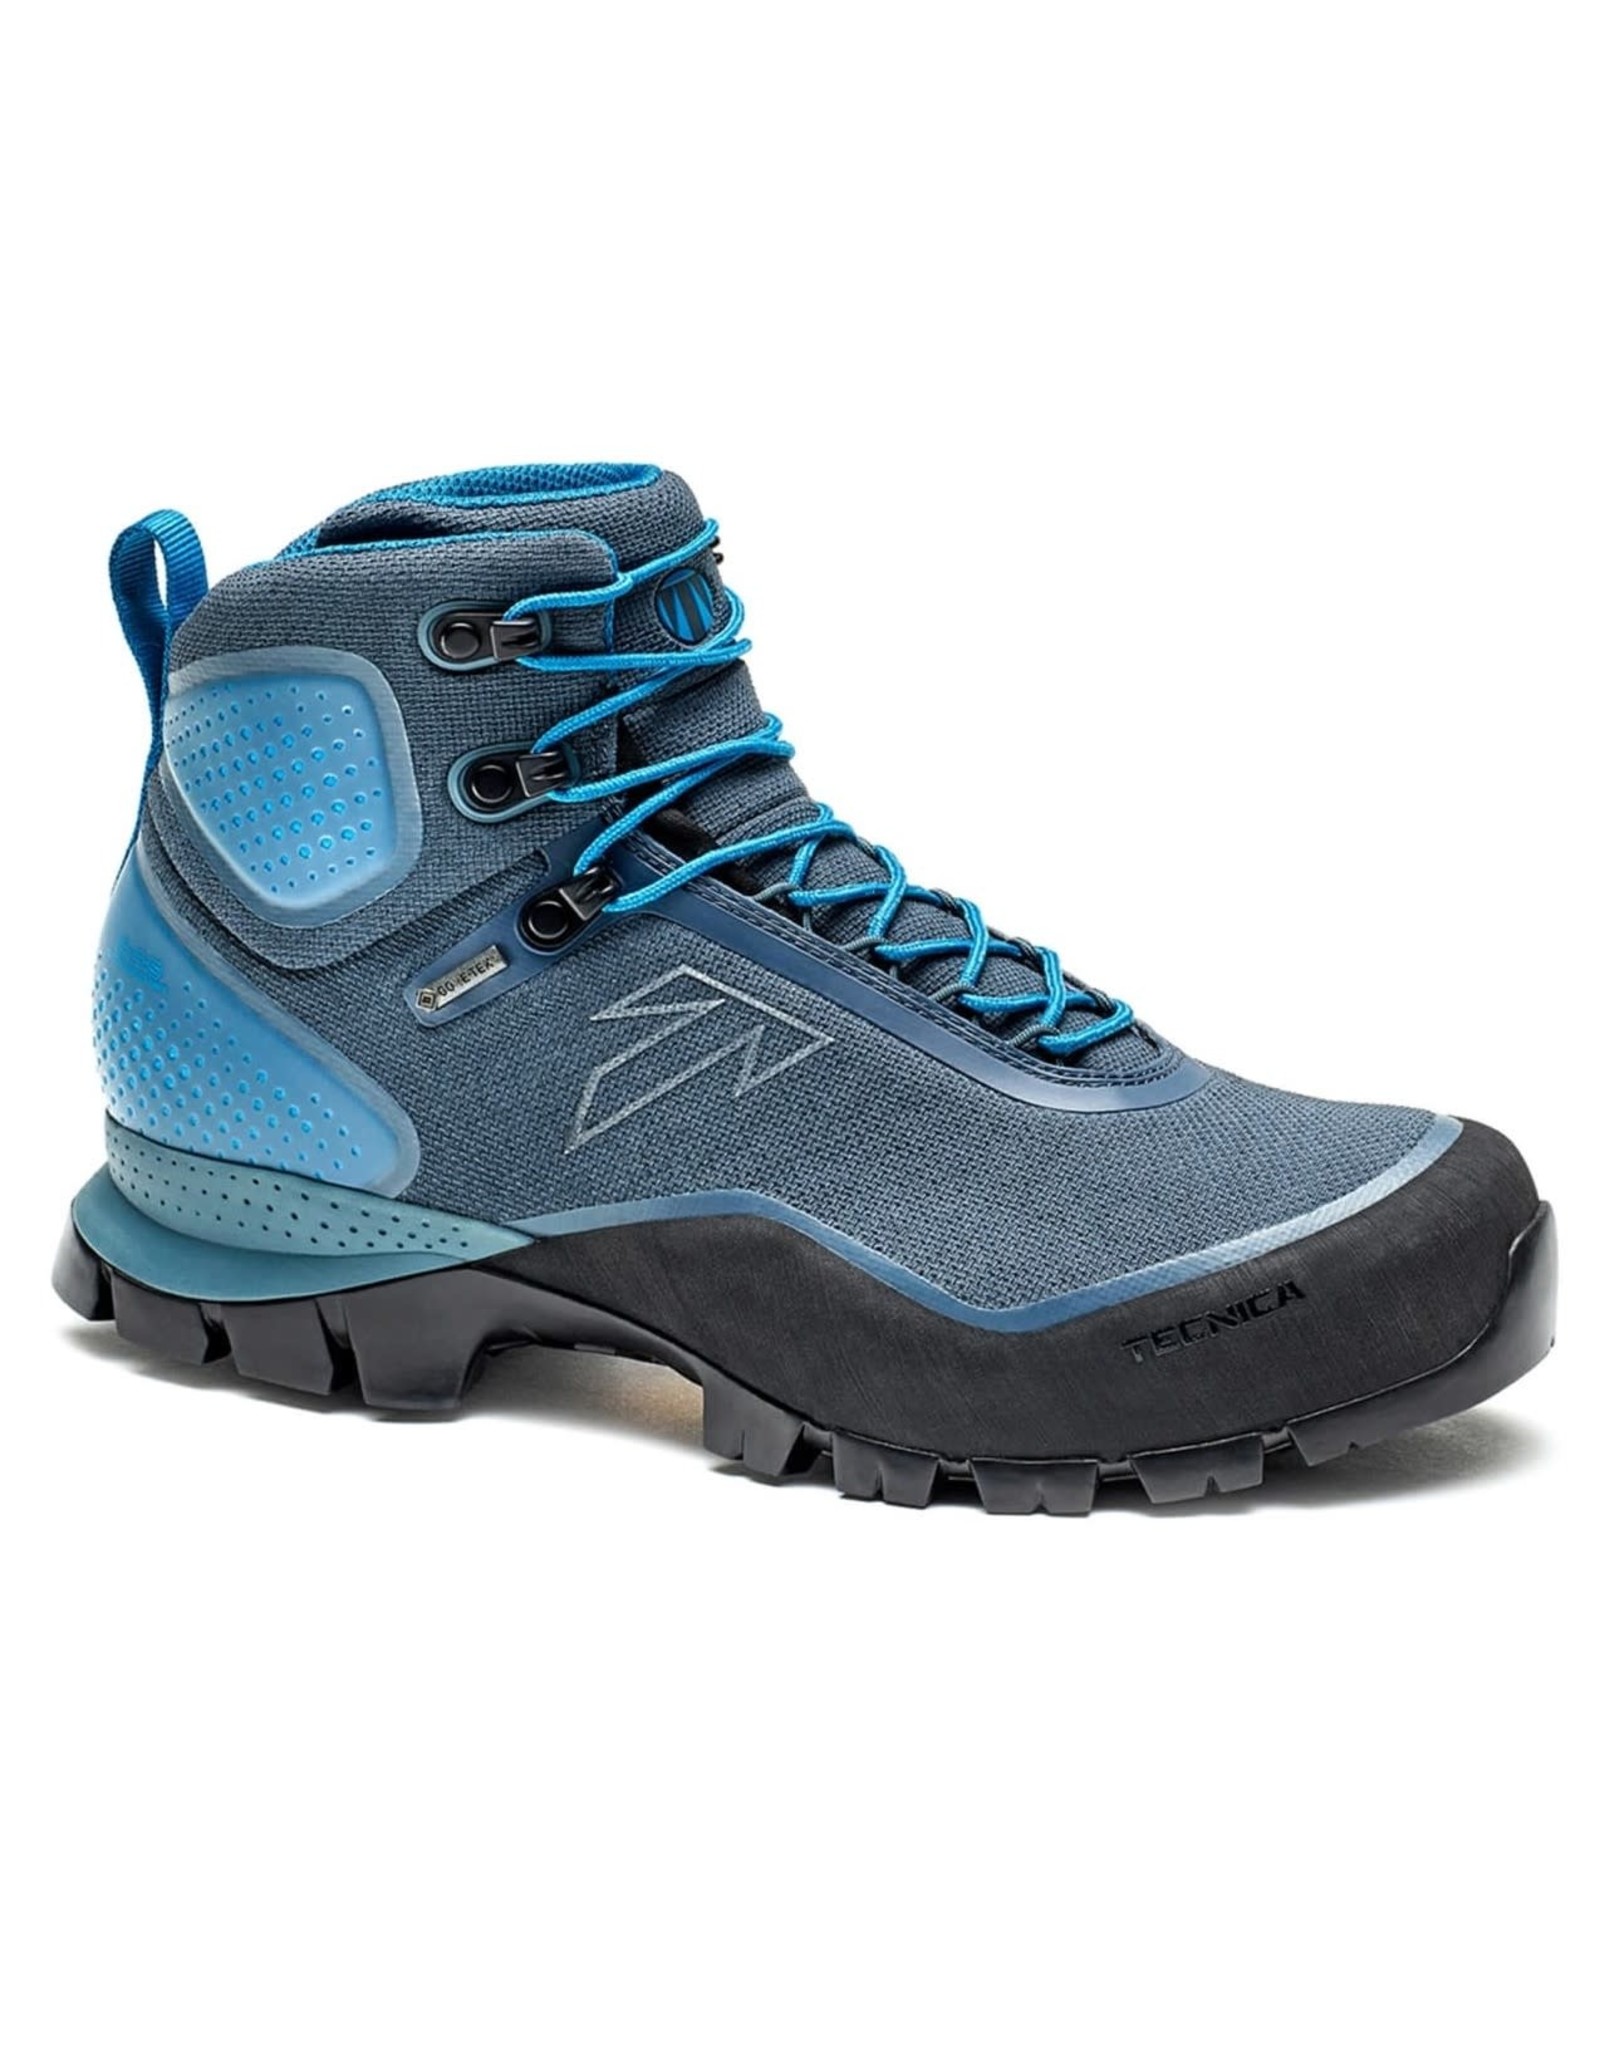 Tecnica Forge S GTX Boots - Women 